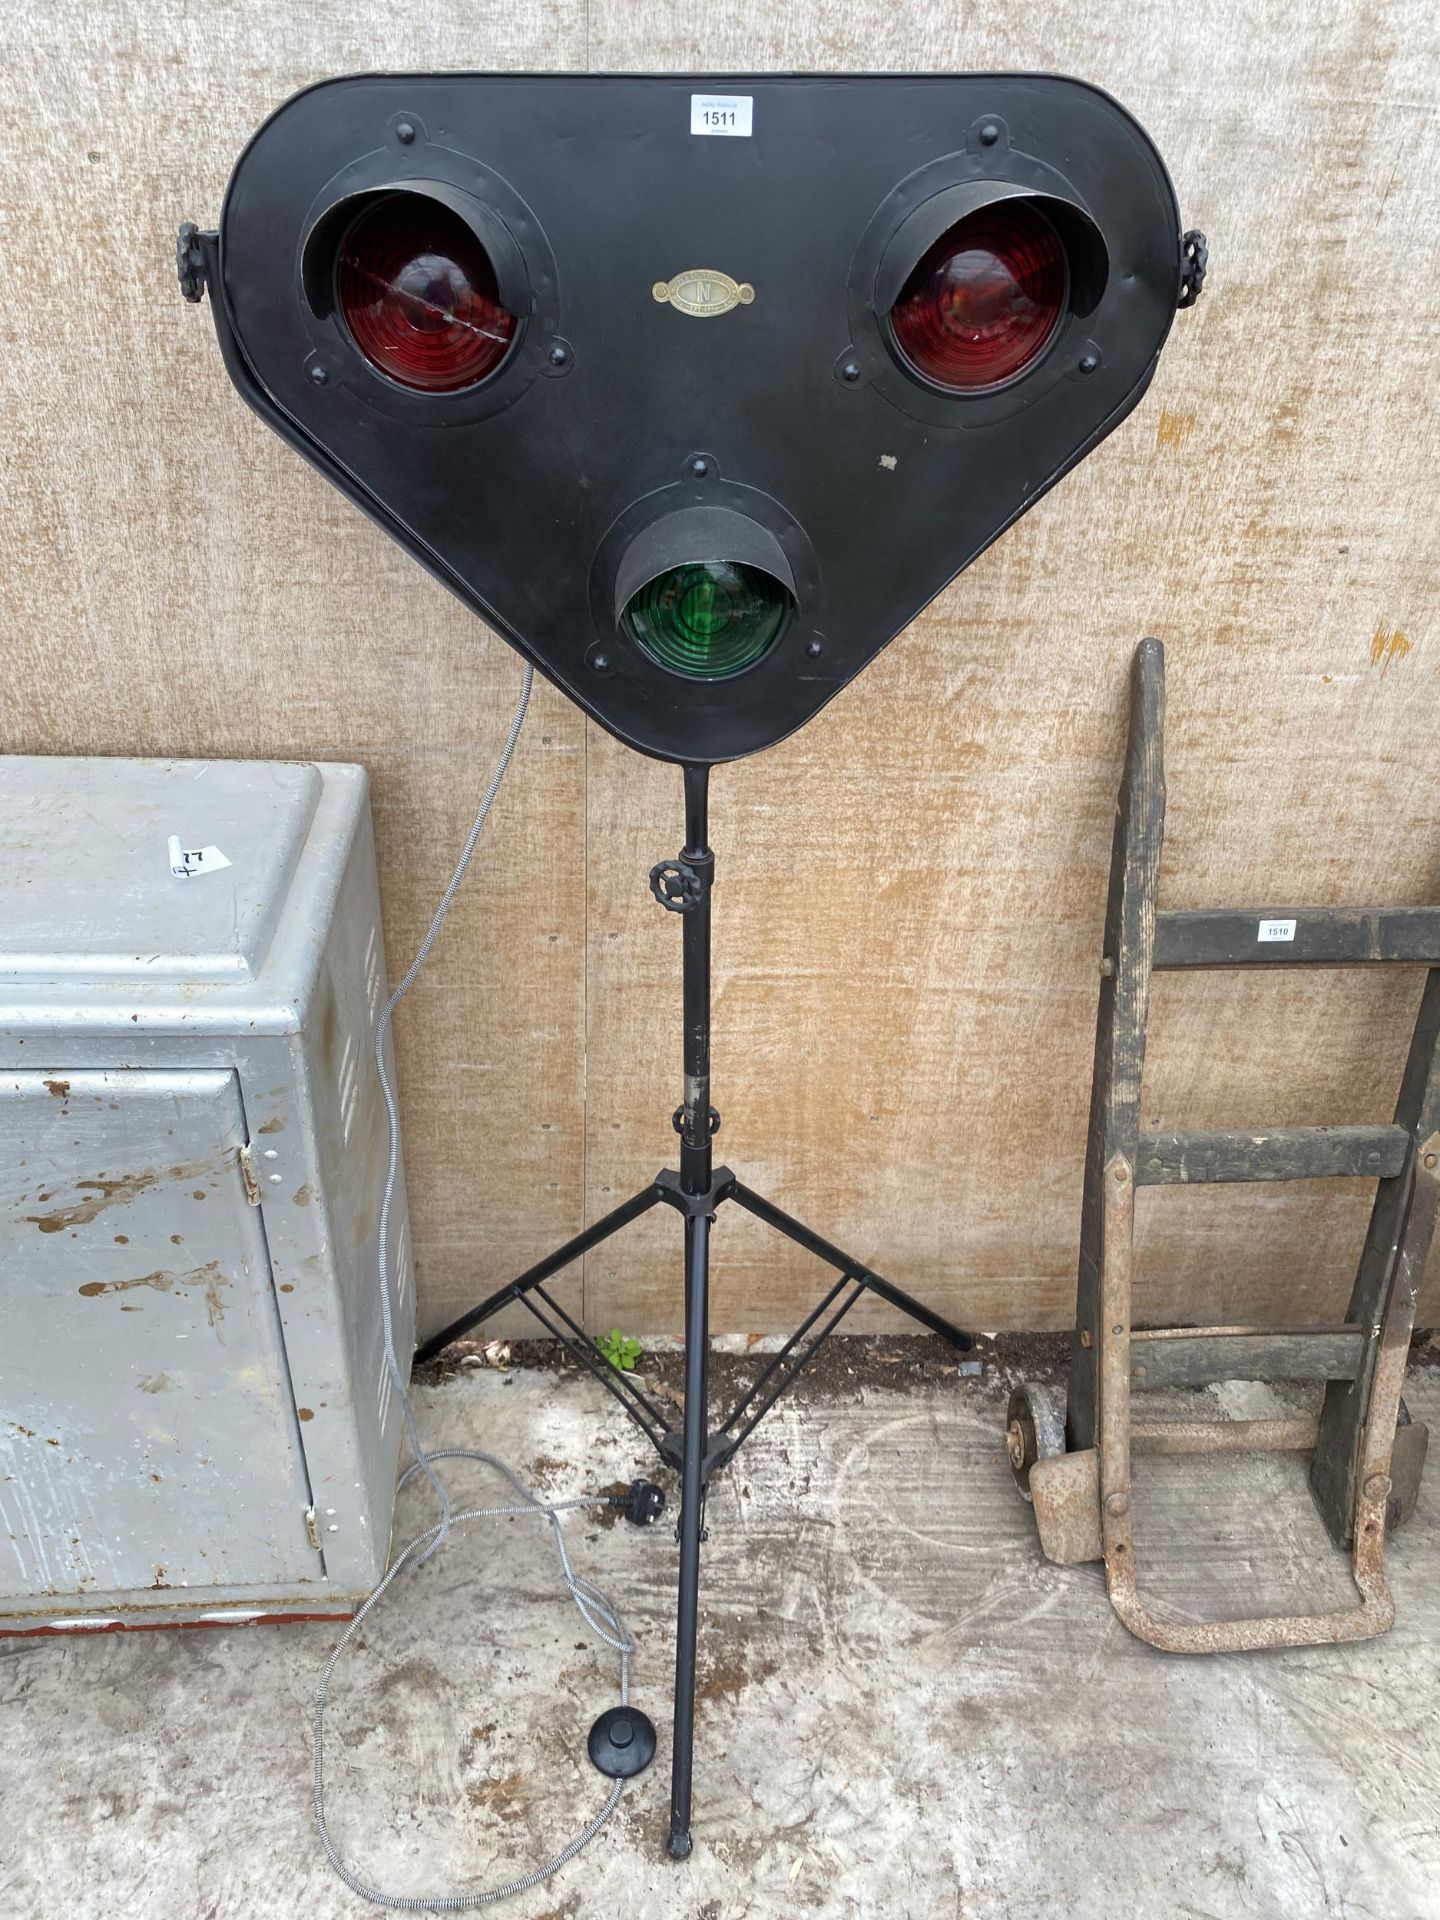 A 'NOBLE LIGHTING COMPANY' TRAIN SIGNAL STYLE LIGHT WITH TRIPOD BASE